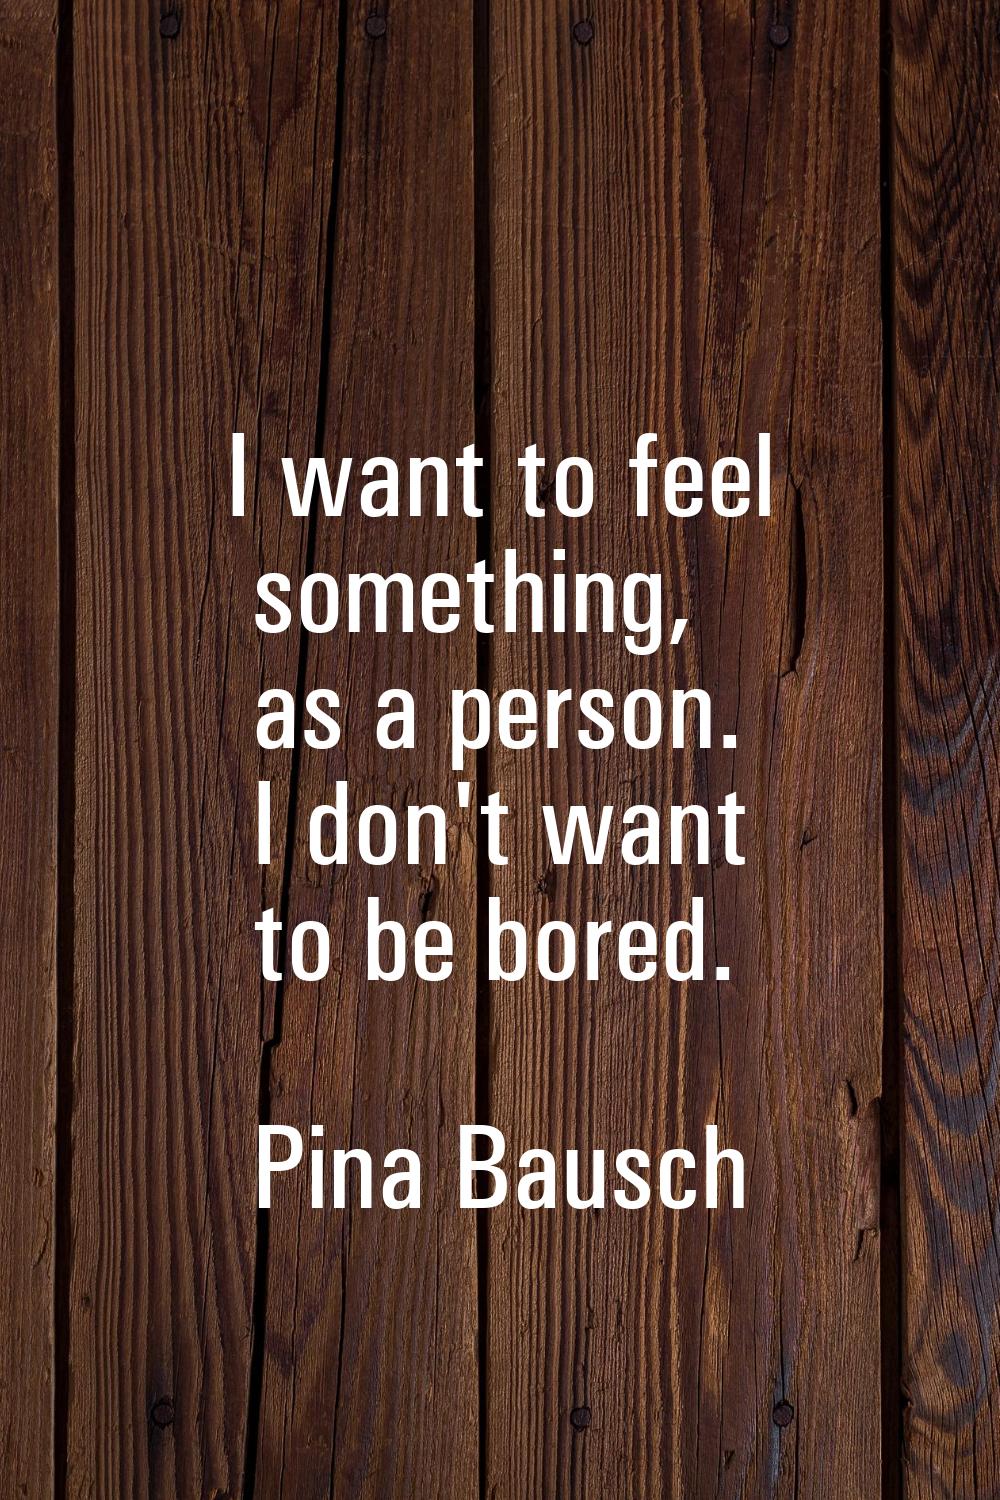 I want to feel something, as a person. I don't want to be bored.